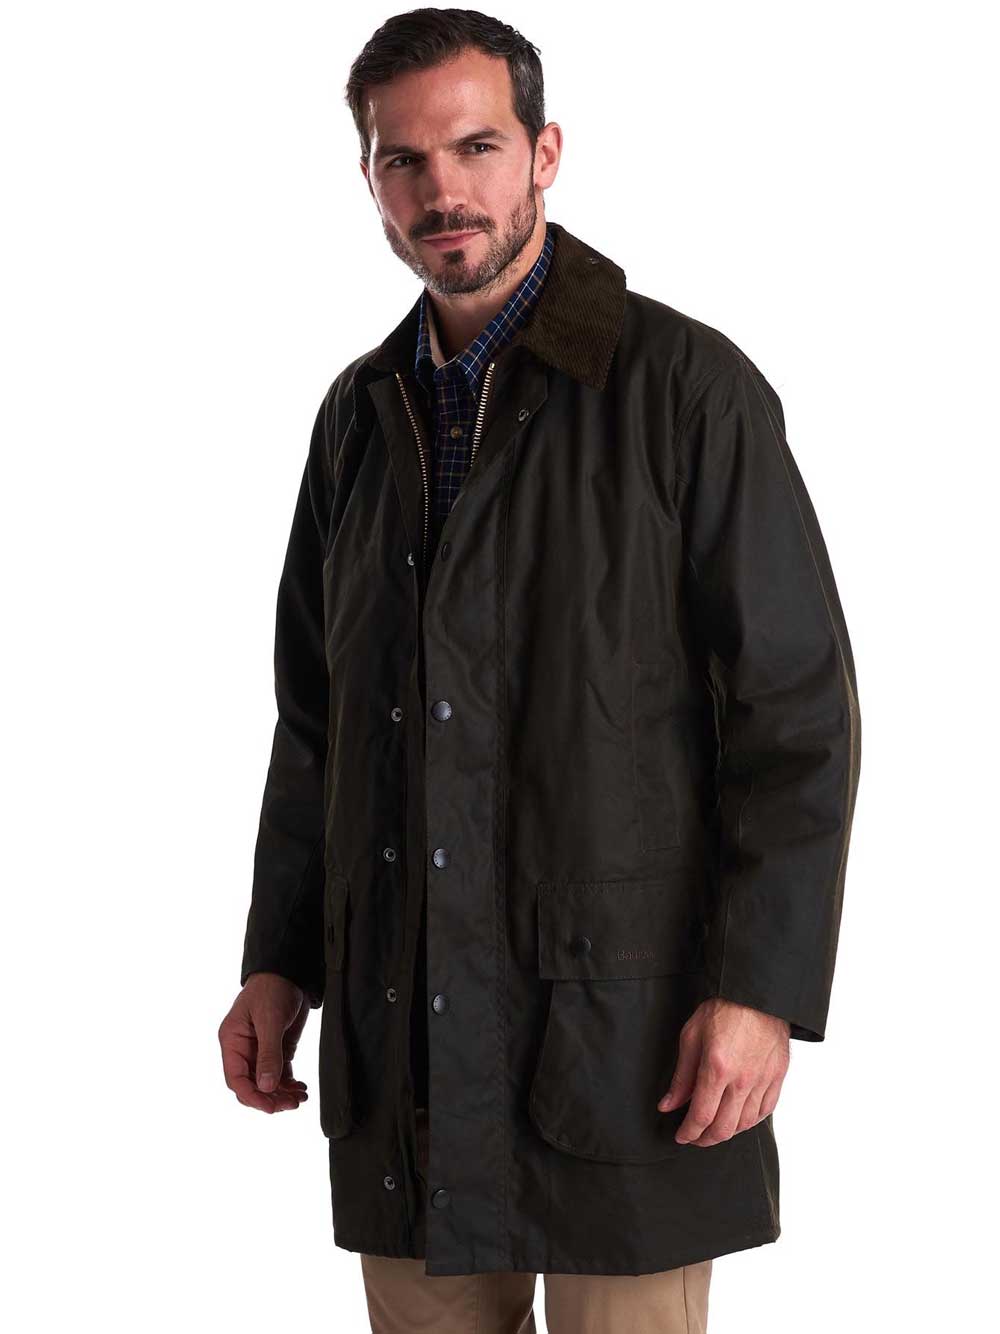 BARBOUR Classic Northumbria Wax Jacket - Mens 8oz Sylkoil - Olive